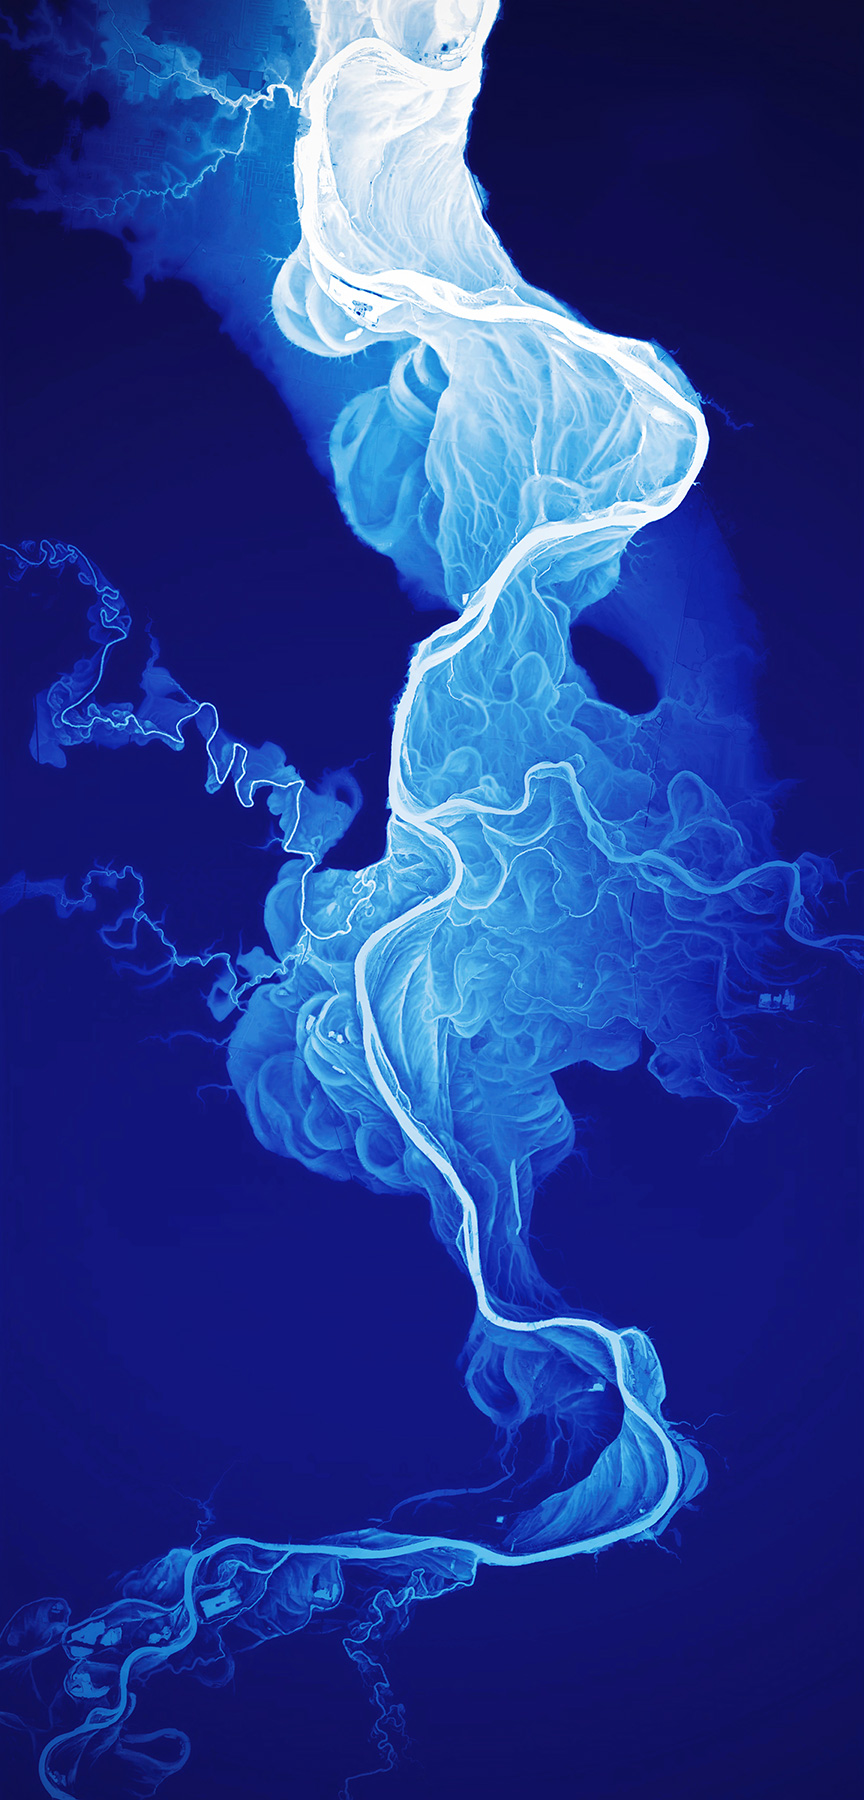 cartography of Willamette River Historical Stream Channels